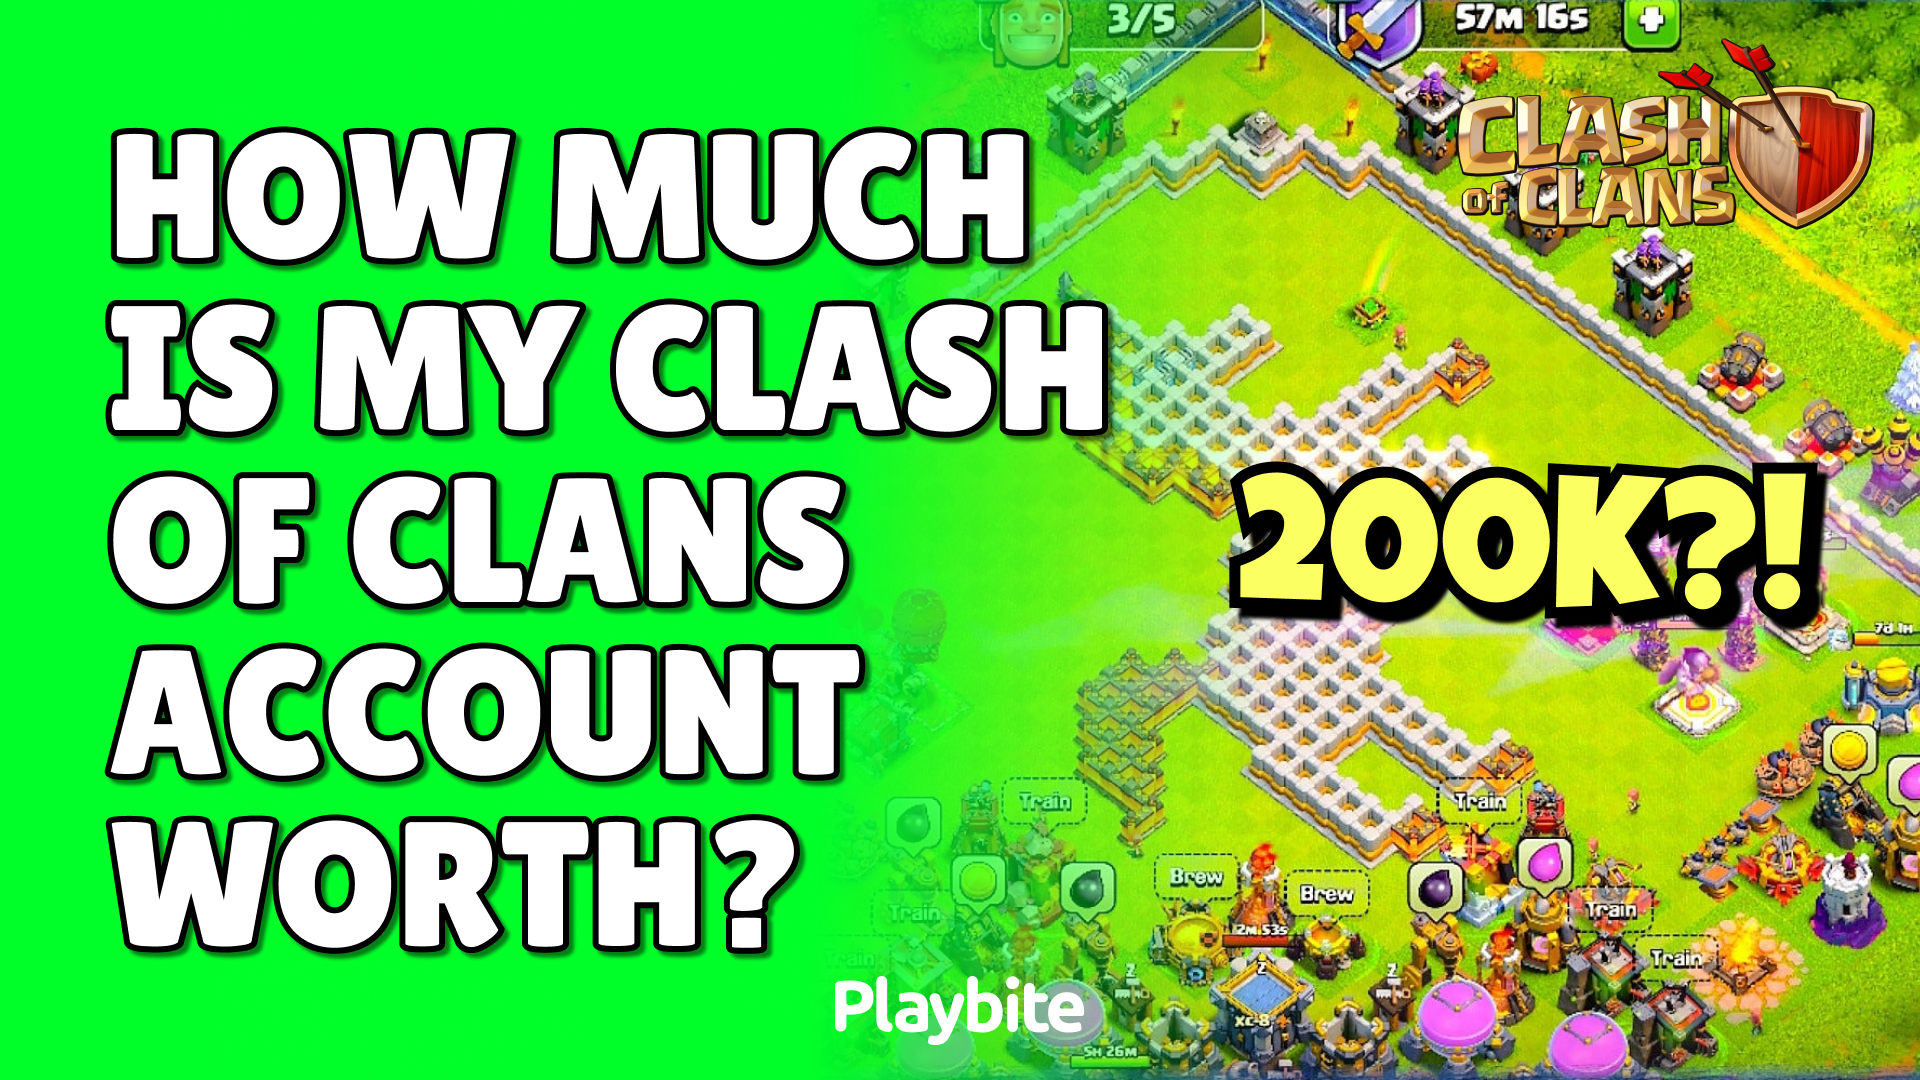 How Much Is My Clash Of Clans Account Worth?